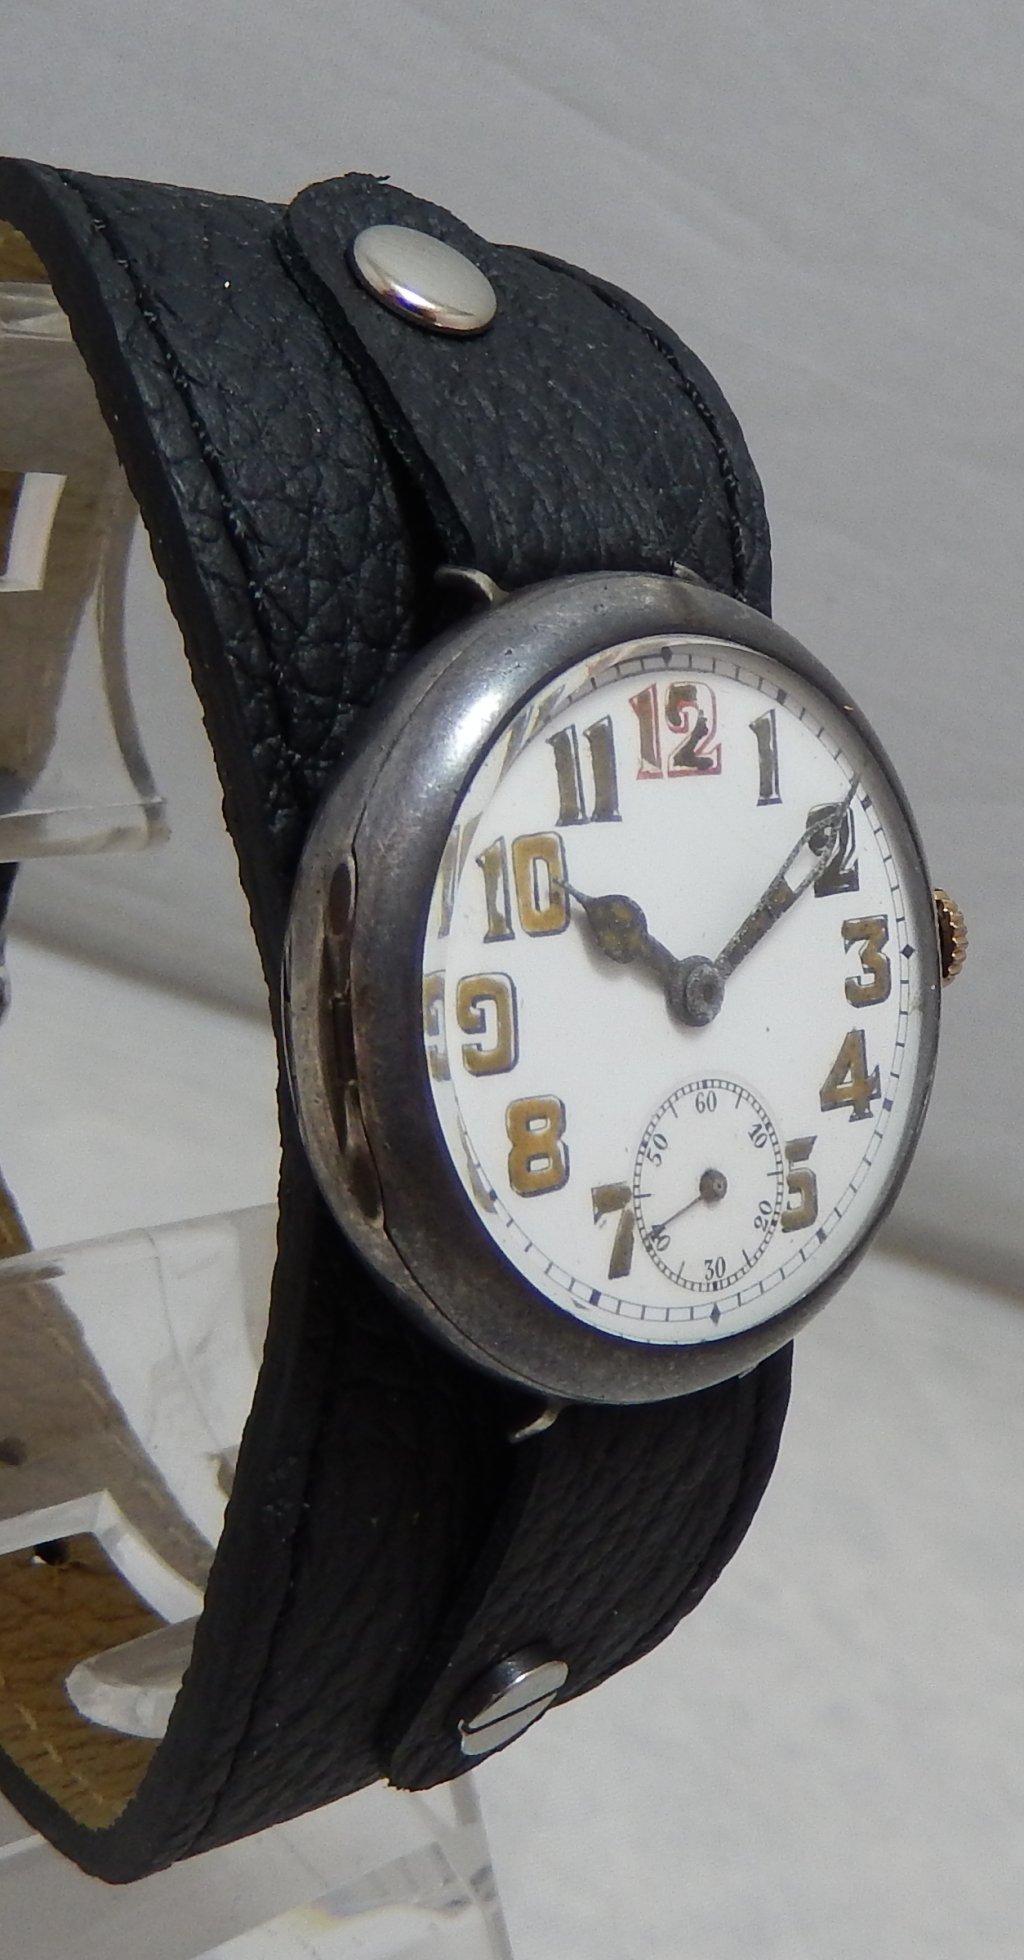 Rolex WWI Officers Trench Watch c. 1915 